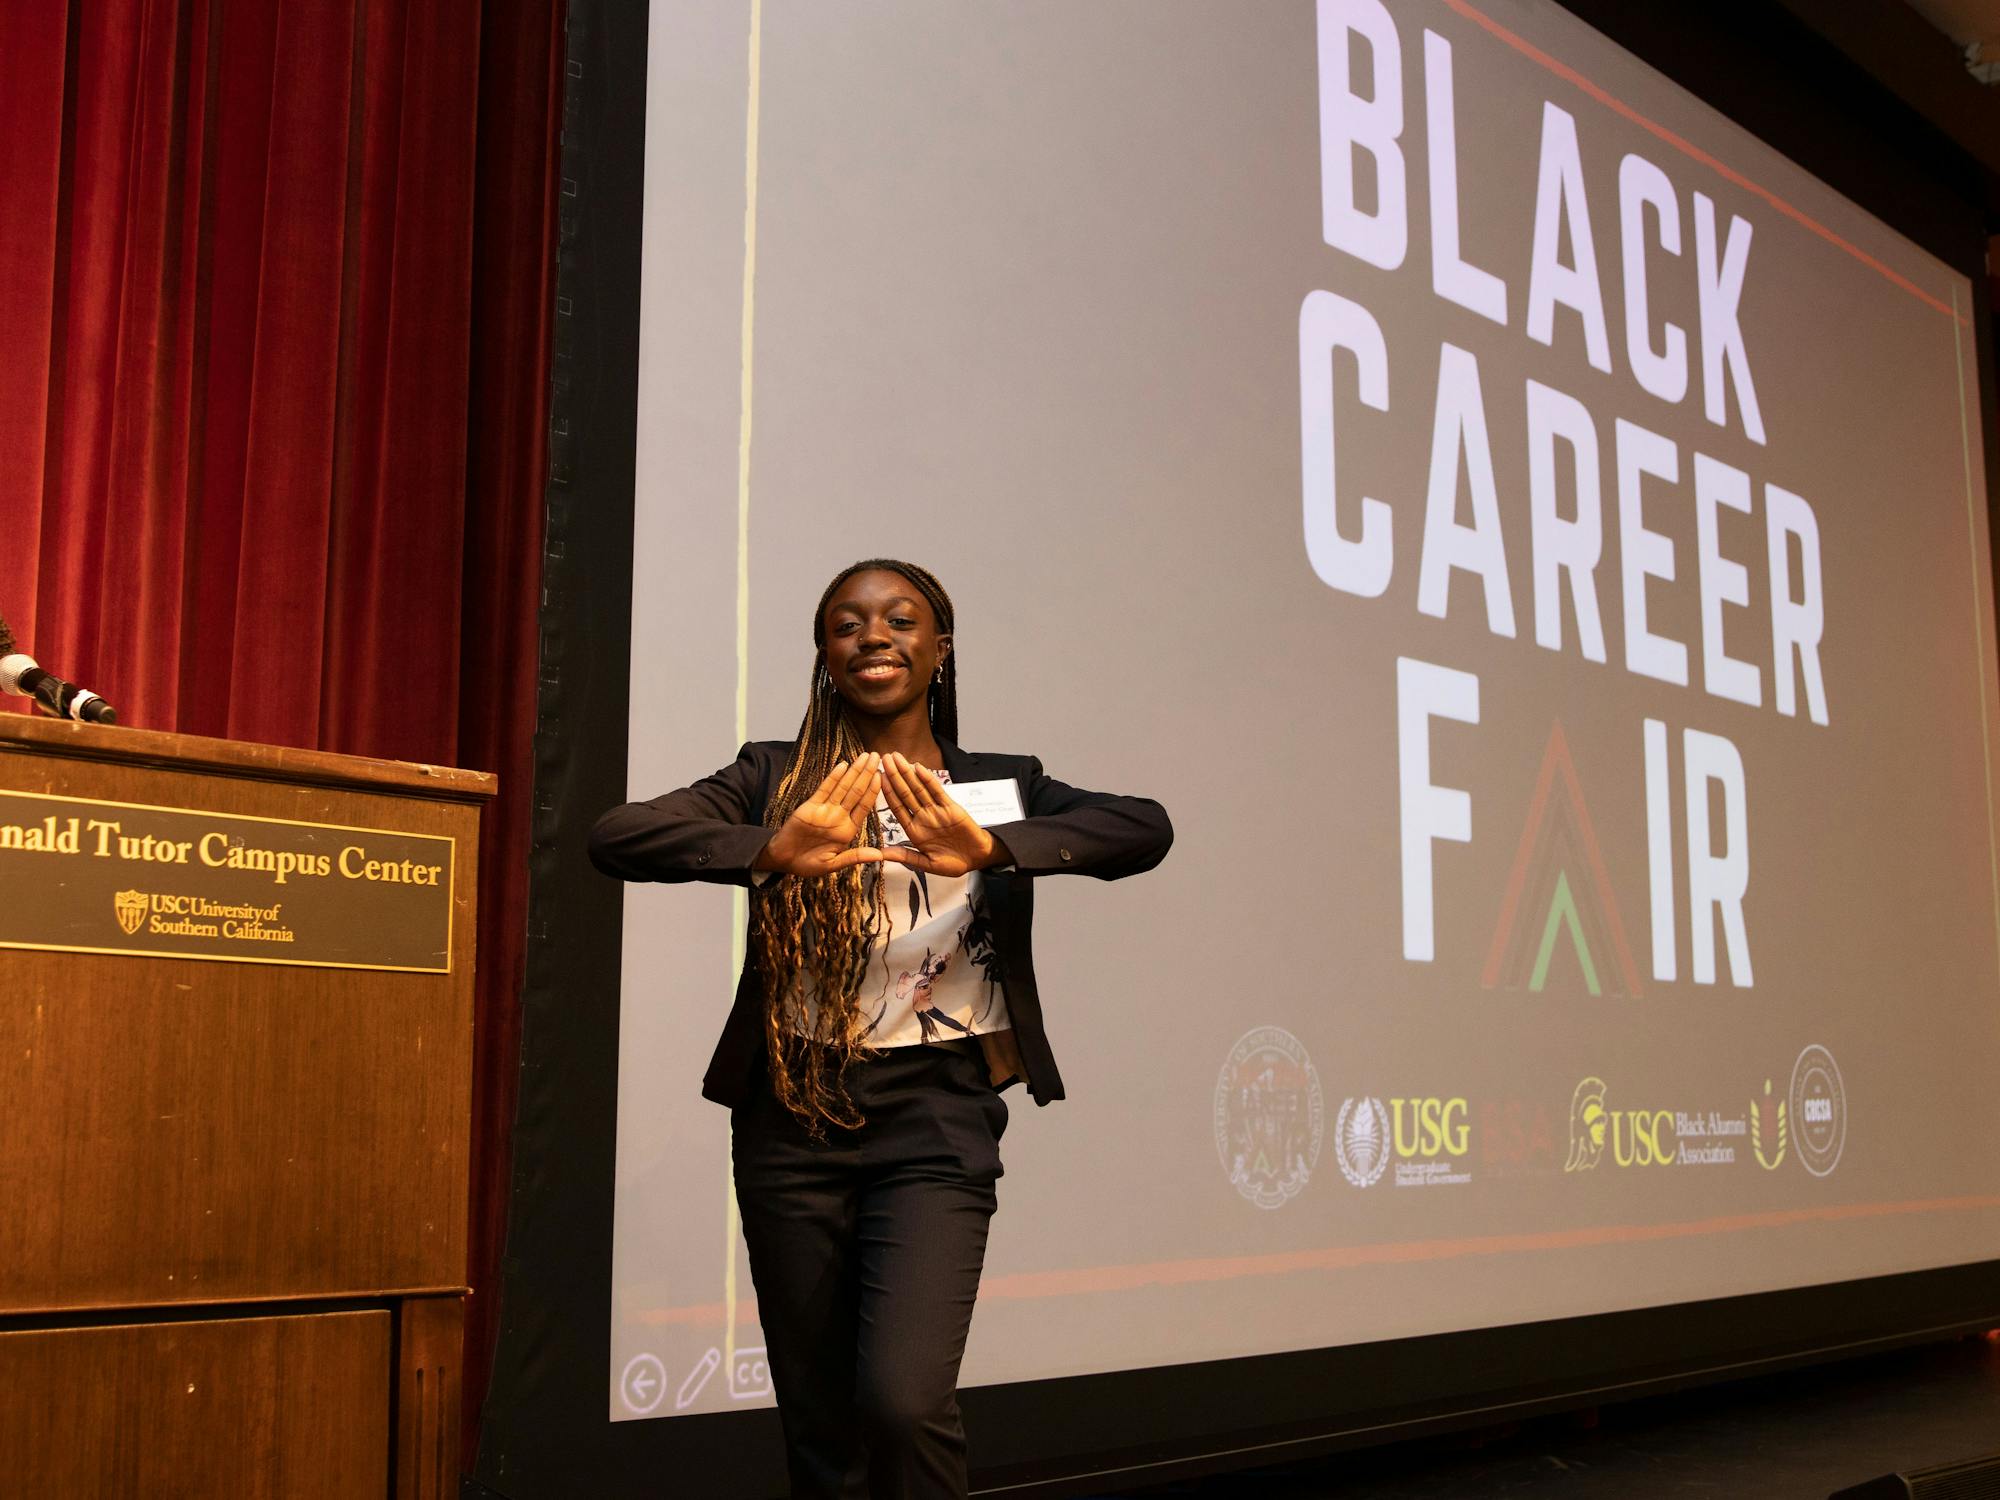 Person stands in front of screen that says Black Career Fair